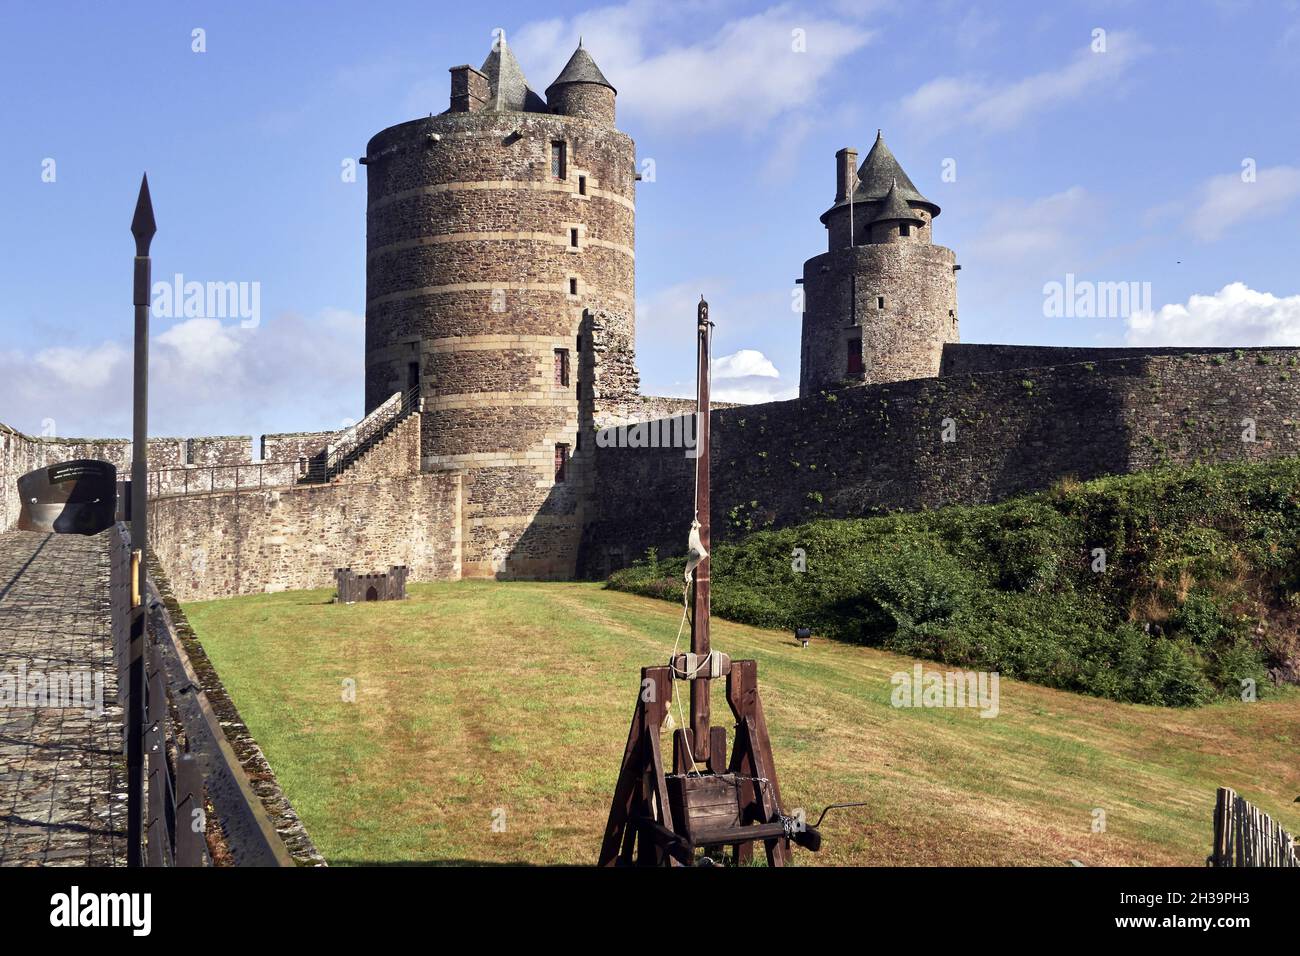 Fougeres, France. Ille-et-Vilaine department, Britain.A reconstruction of a catapult in the backyard of the medieval castle helps to understand how th Stock Photo